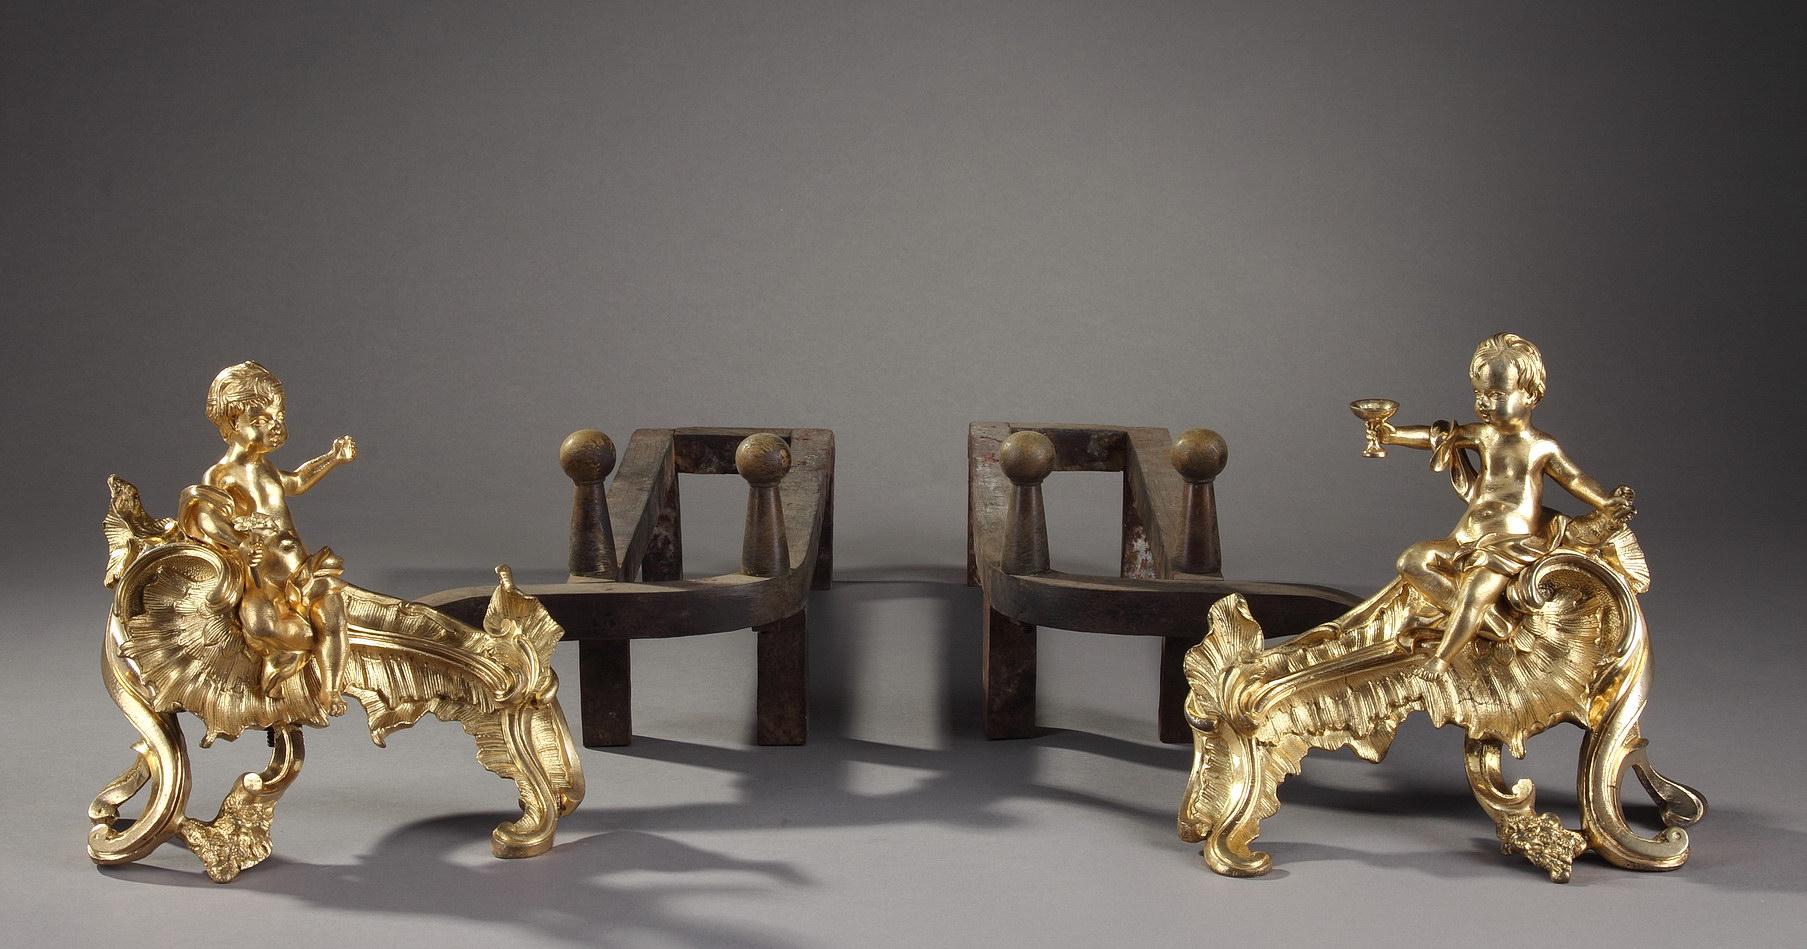 Pair of chased and gilded bronze andirons, each adorned with a putto girded with a drapery, seated on a moving base, carved with gadrooned foliage. One of the putti is holding a cup towards the second one who is holding a flower. Louis XV period.